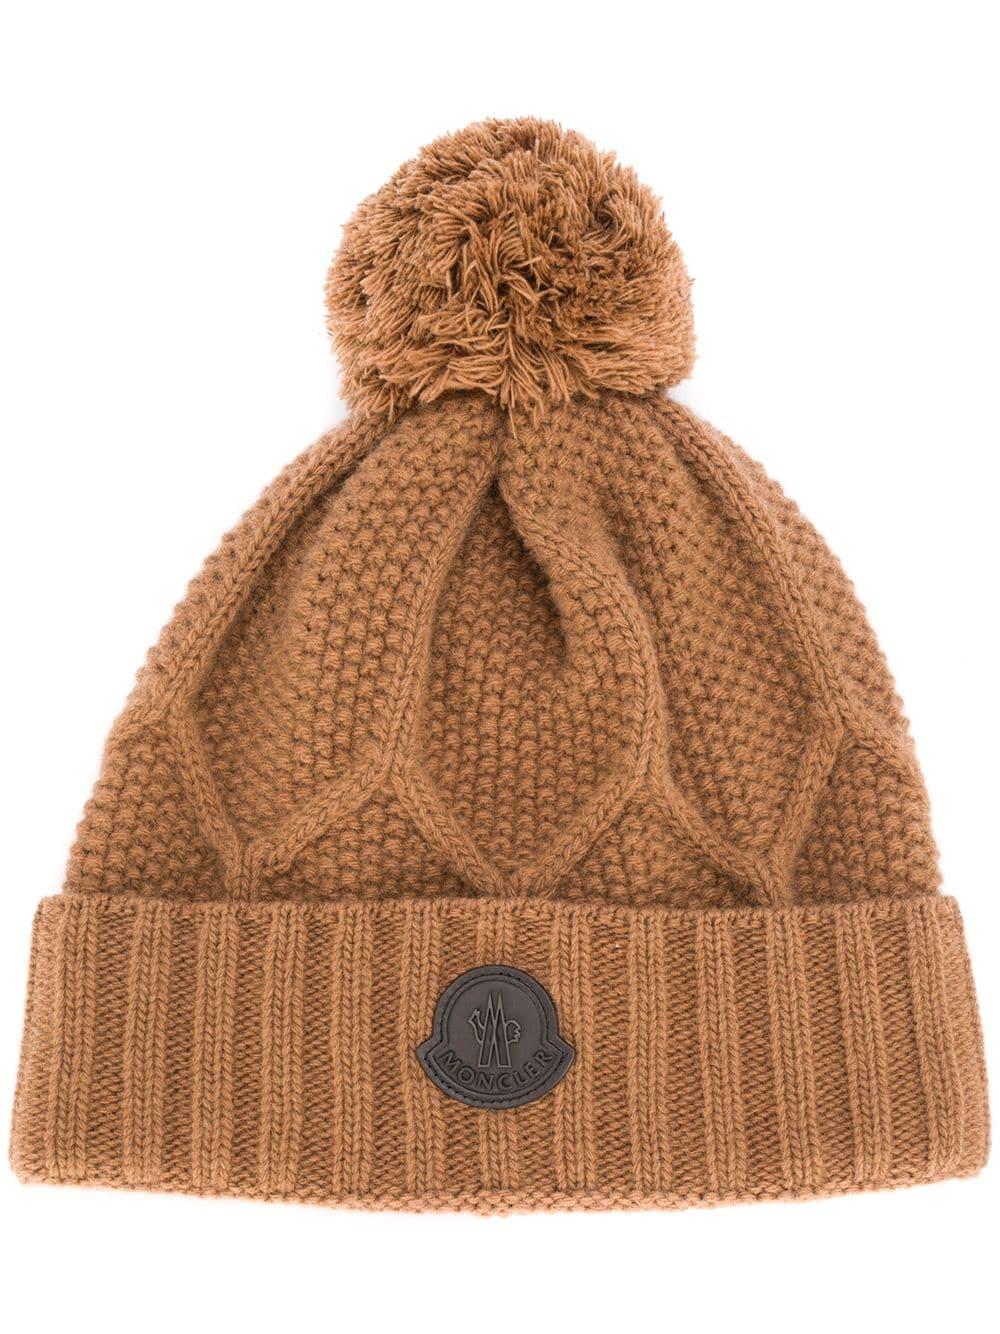 Moncler Wool Logo Patch Pompom Beanie in Brown for Men - Lyst